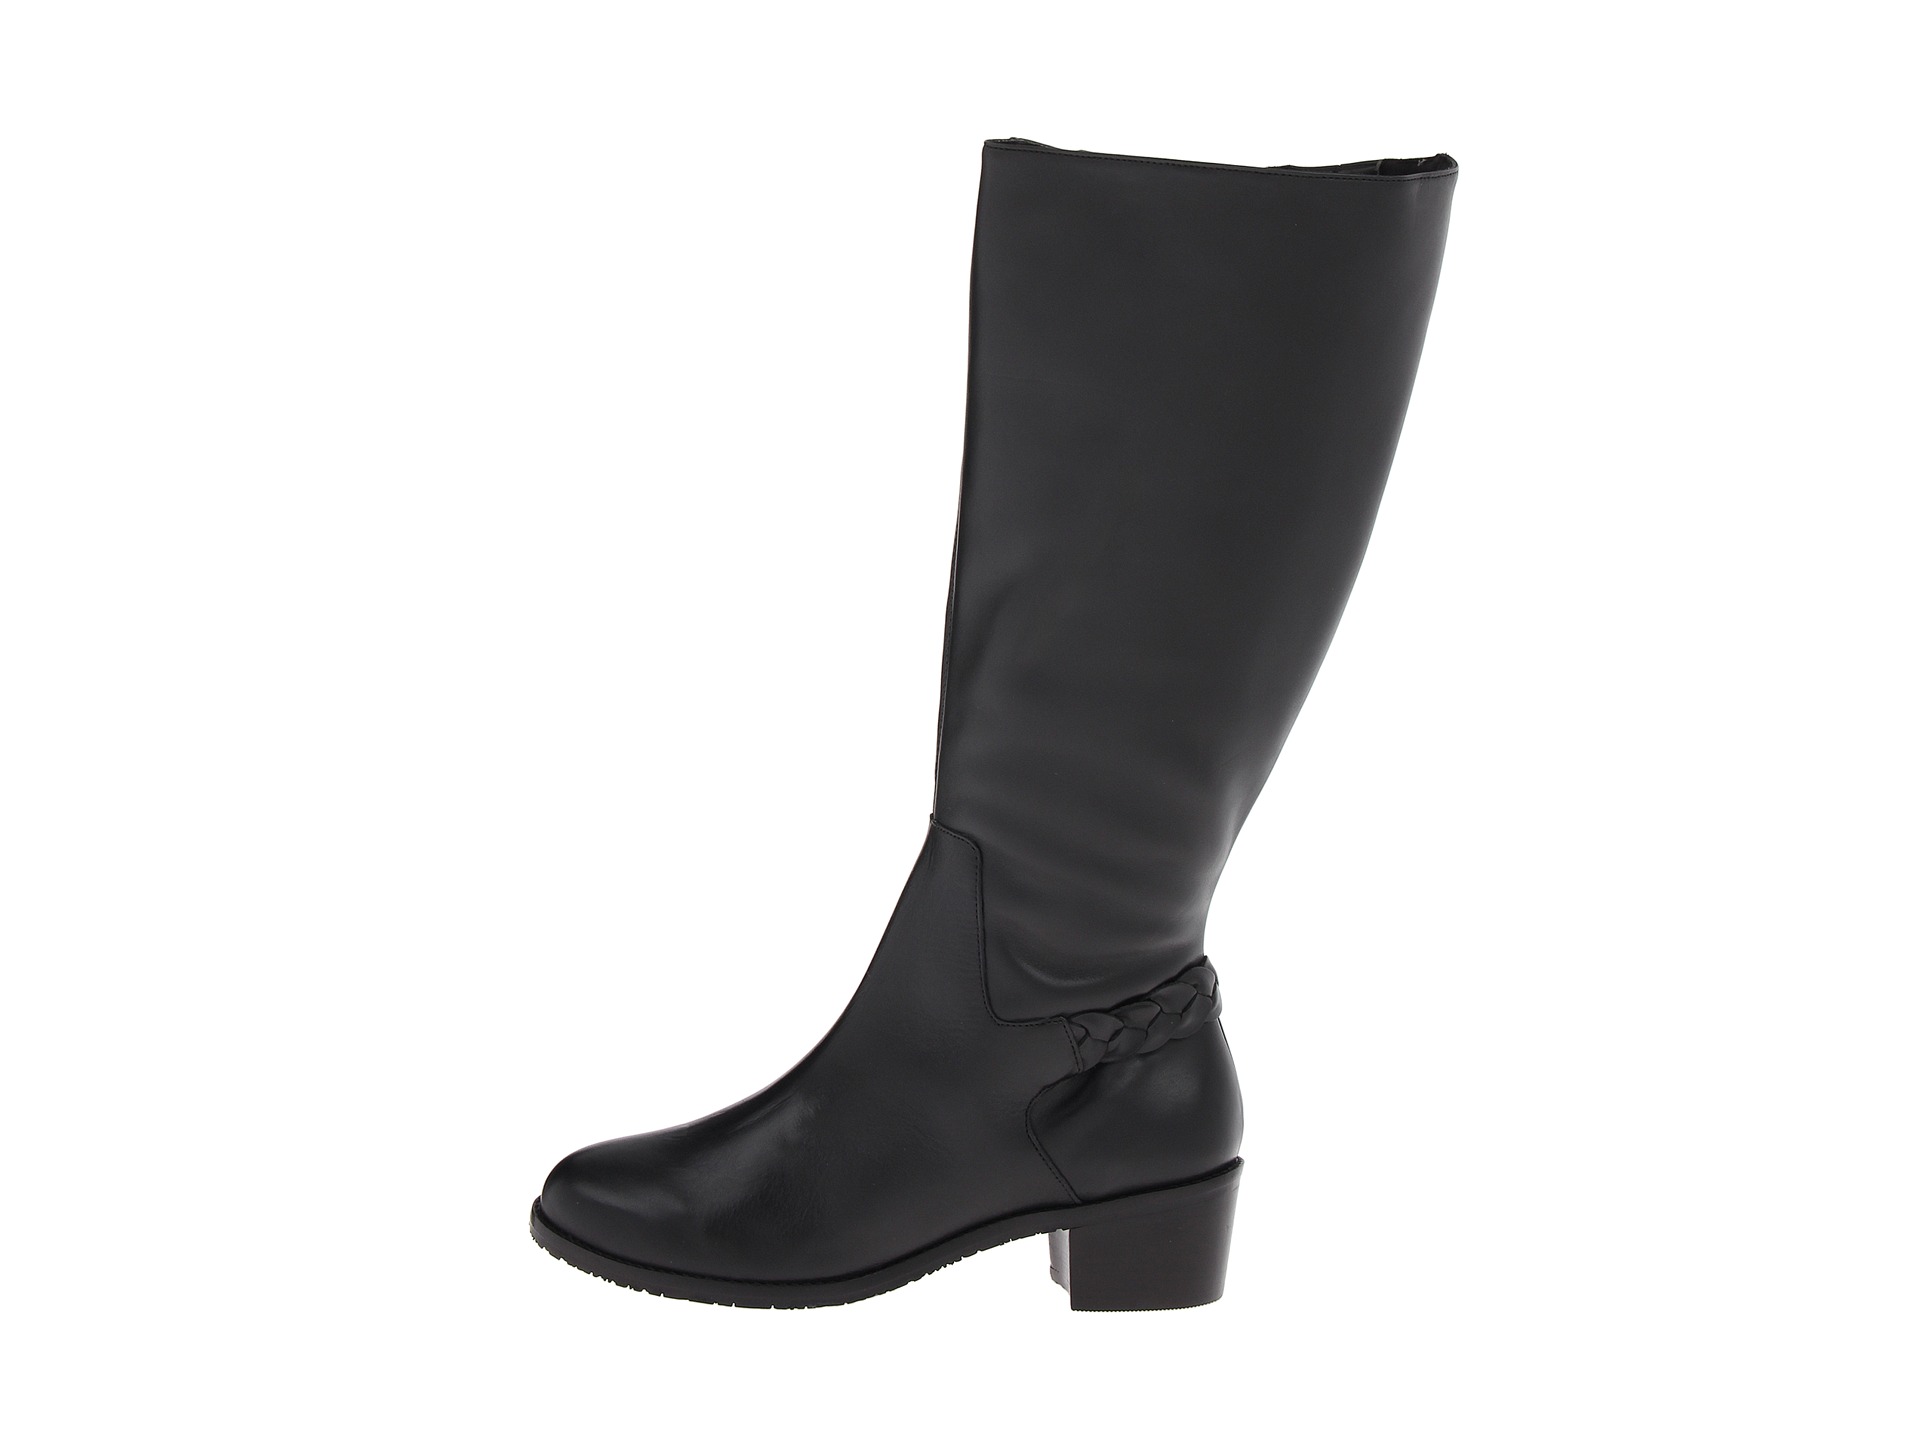 Rose Petals Women&#39;s Curly Wide Calf Leather Riding Boot Black - $209.99 : Wide Calf Boots ...